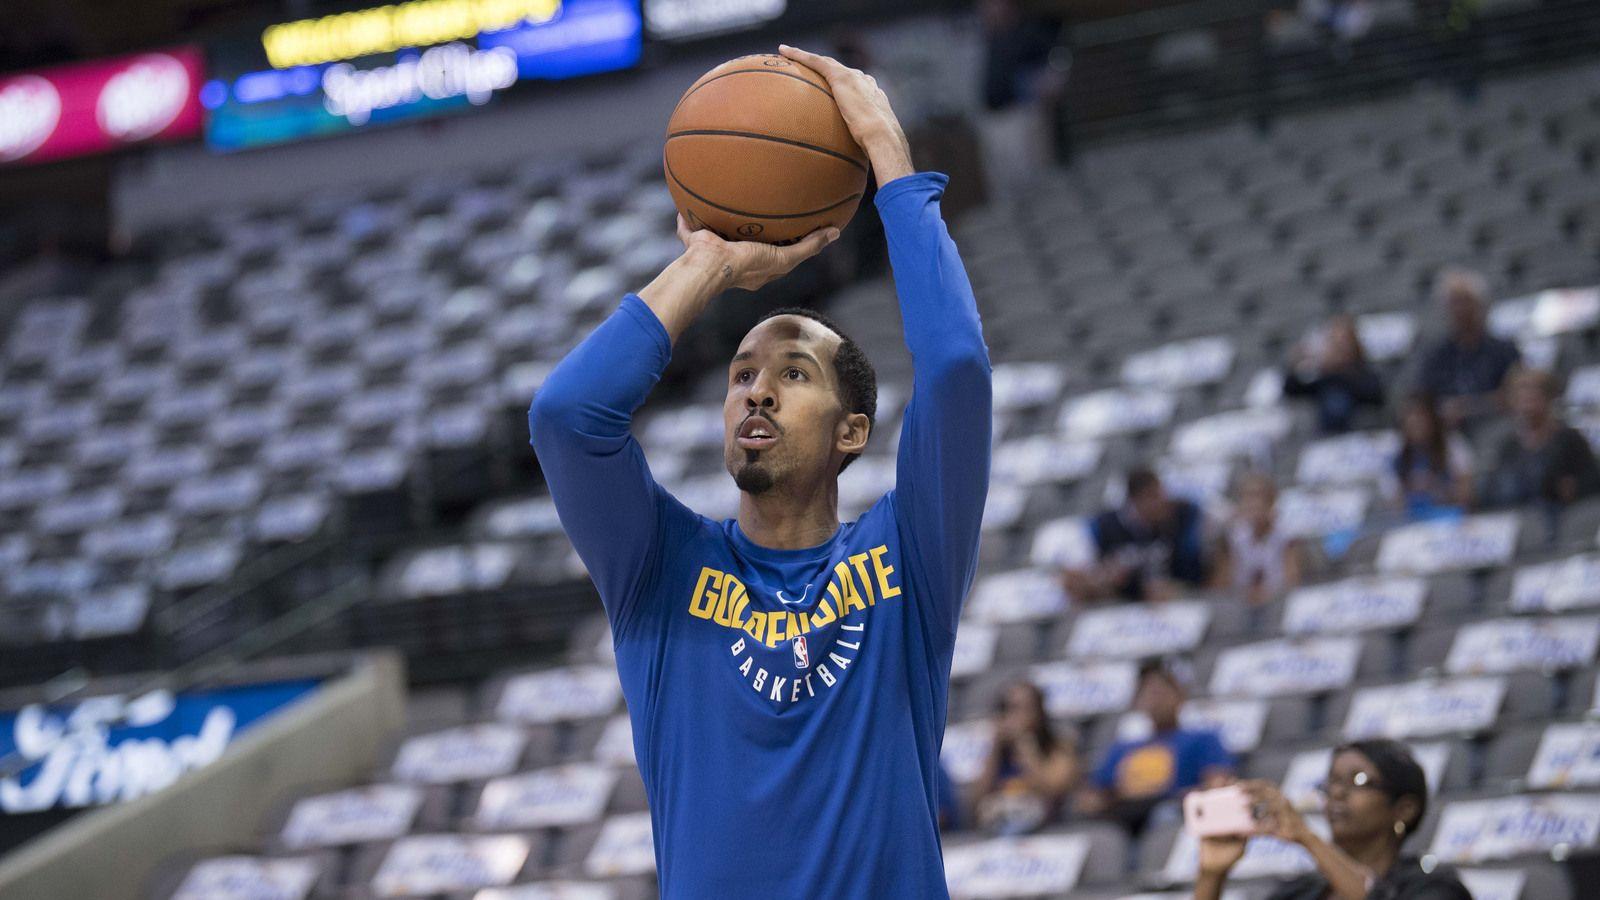 WATCH: Shaun Livingston bumps heads with referee, gets ejected